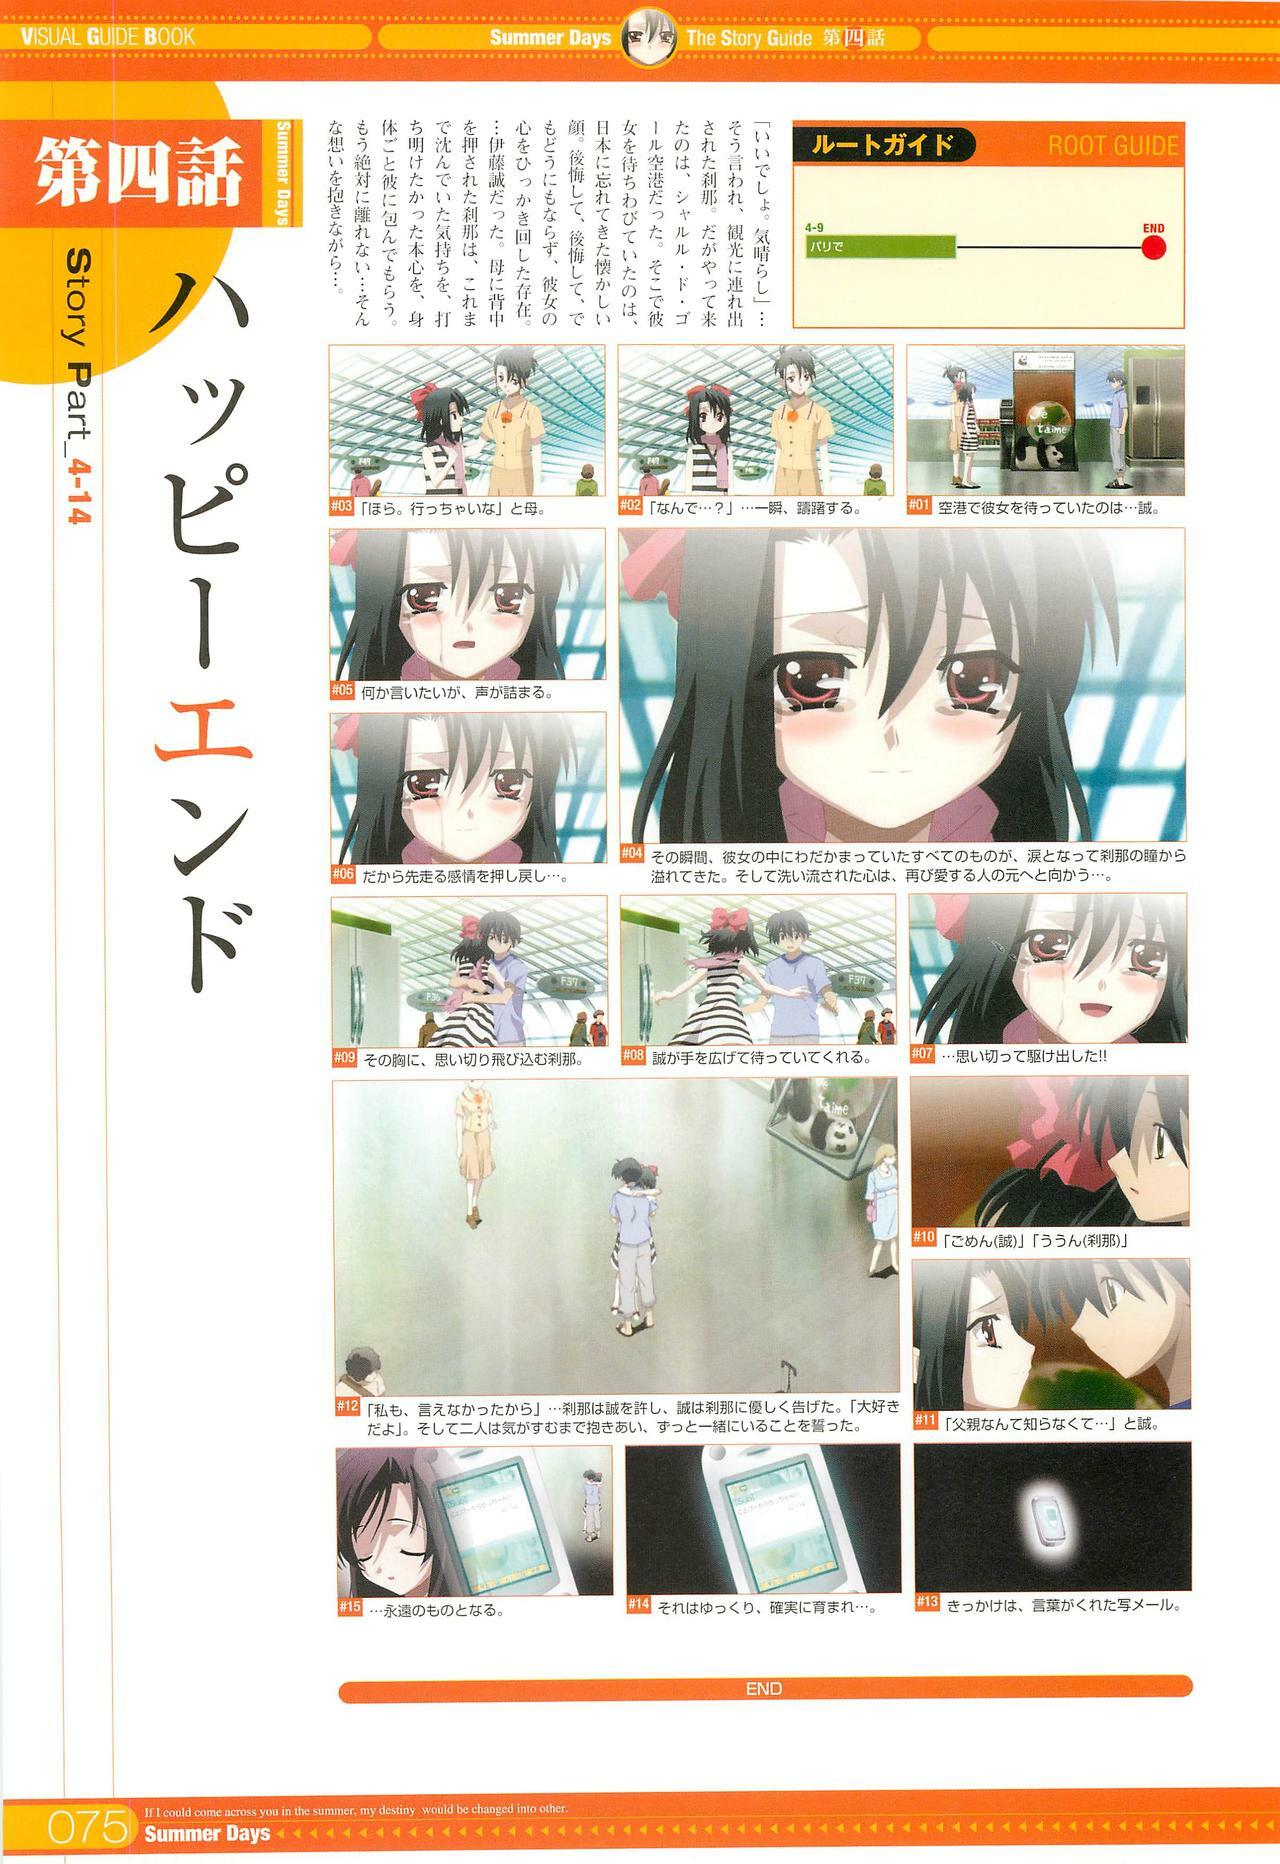 SummerDays Visual Guide Book page 41 full